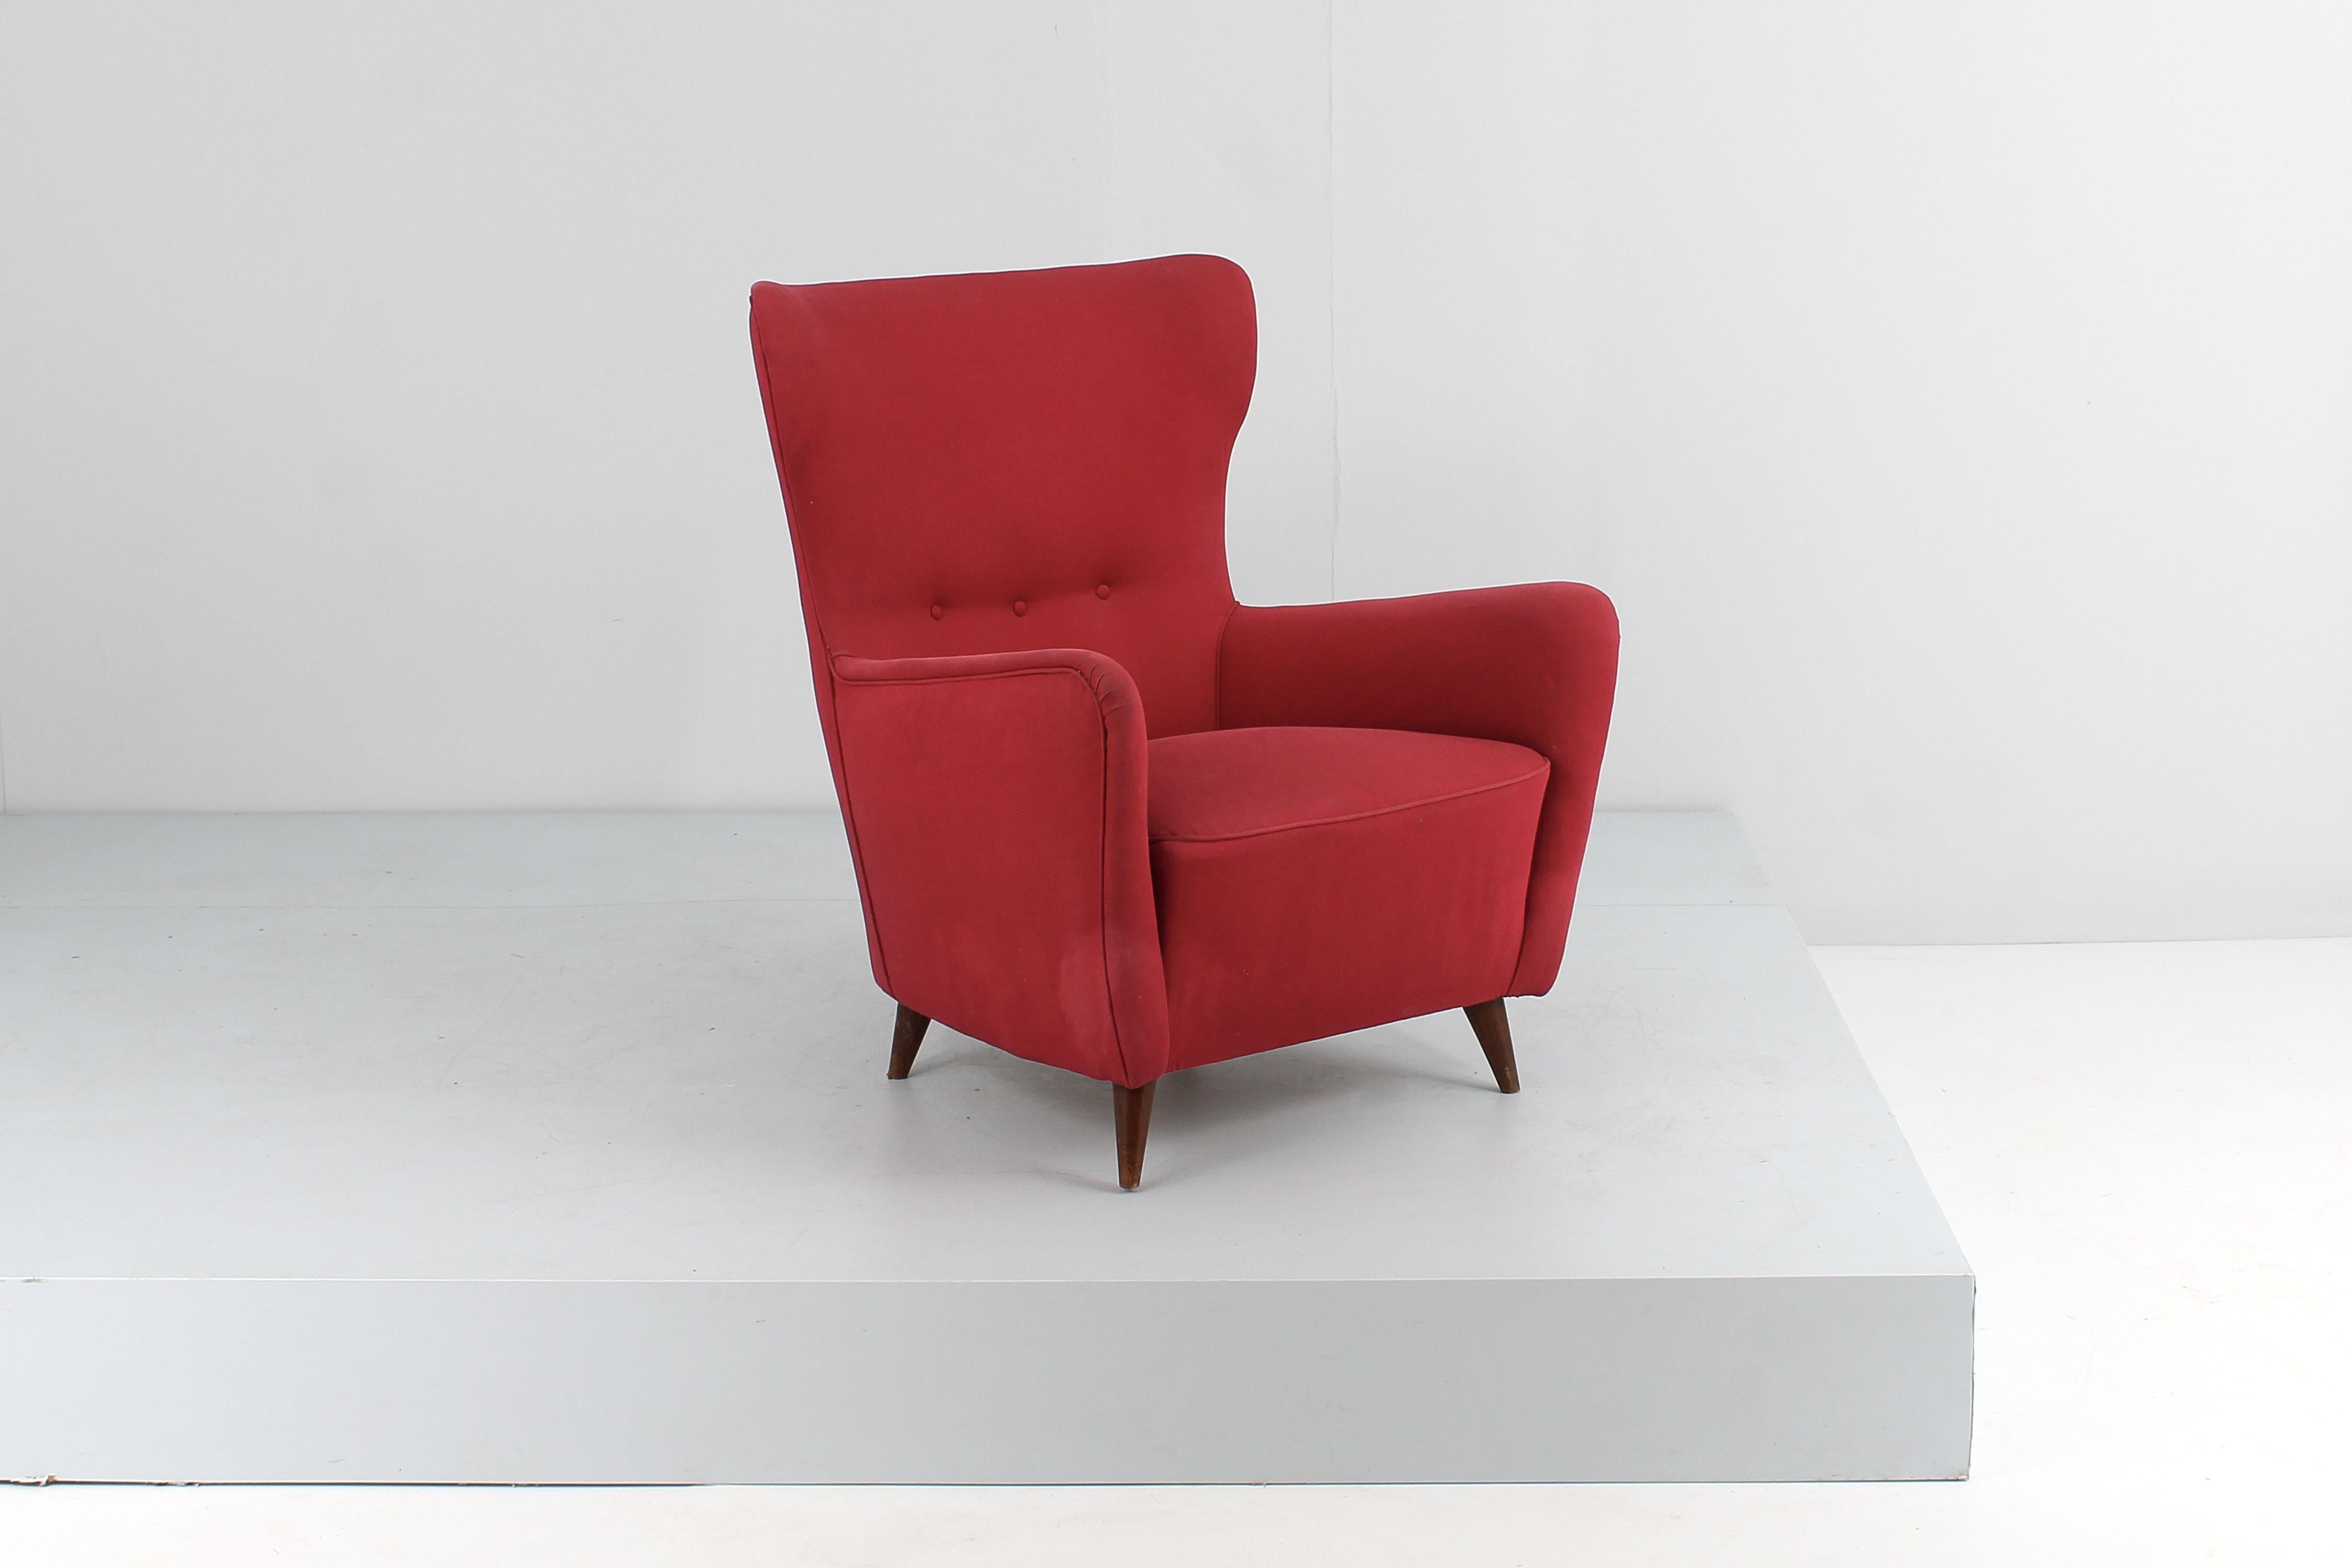 Very beautiful armchair with wooden structure, red fabric covering, and conical wooden feet. Giò Ponti style, italian manifacture in 50s
Wear consistent with age and use.

On sale there is also an armchair of the same style, almost similar, in